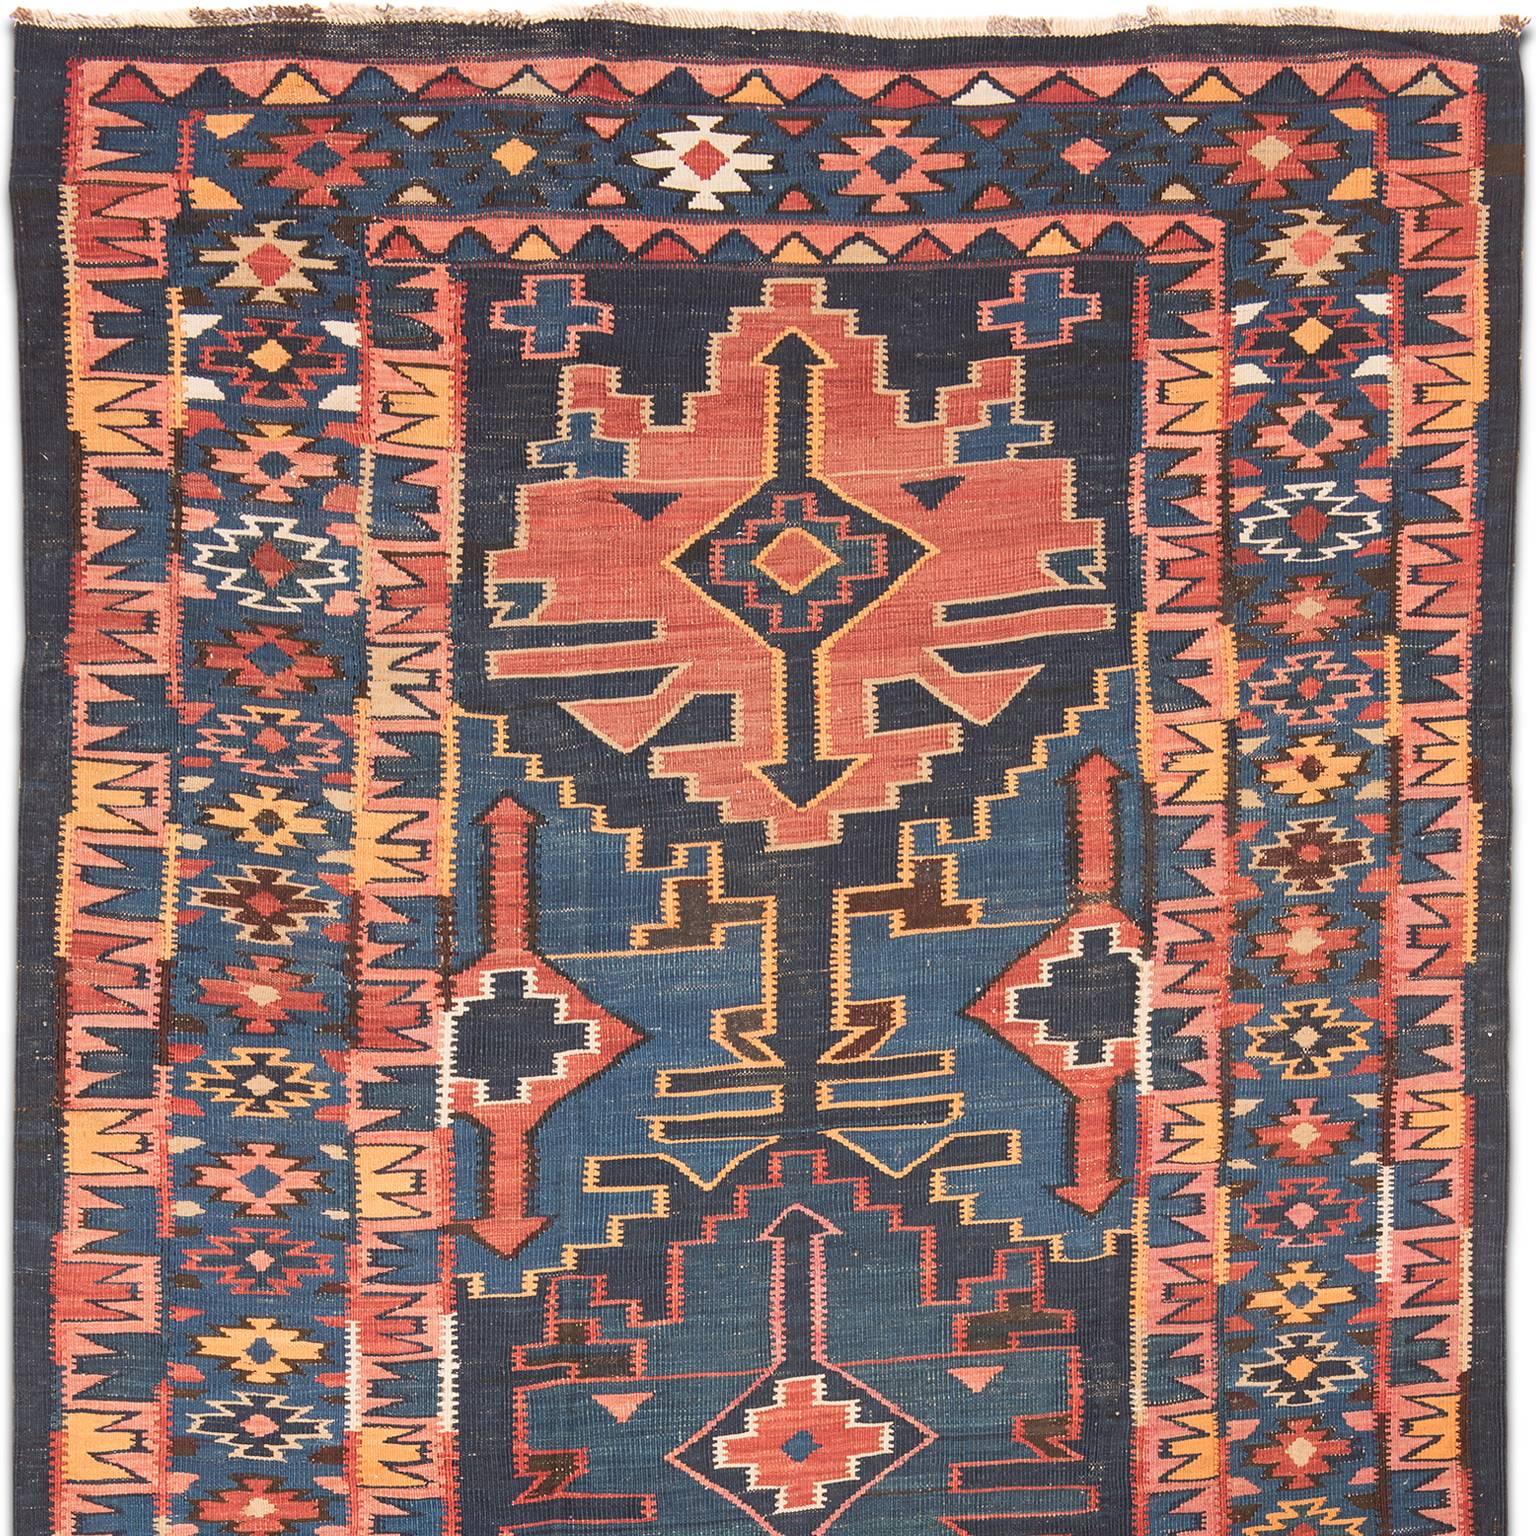 This antique Avar Kilim was woven in the Dagestan area of the east Caucasus in the early 20th century, circa 1920. The dynamic border complements the central field in both design and a wonderfully abashed colourway.